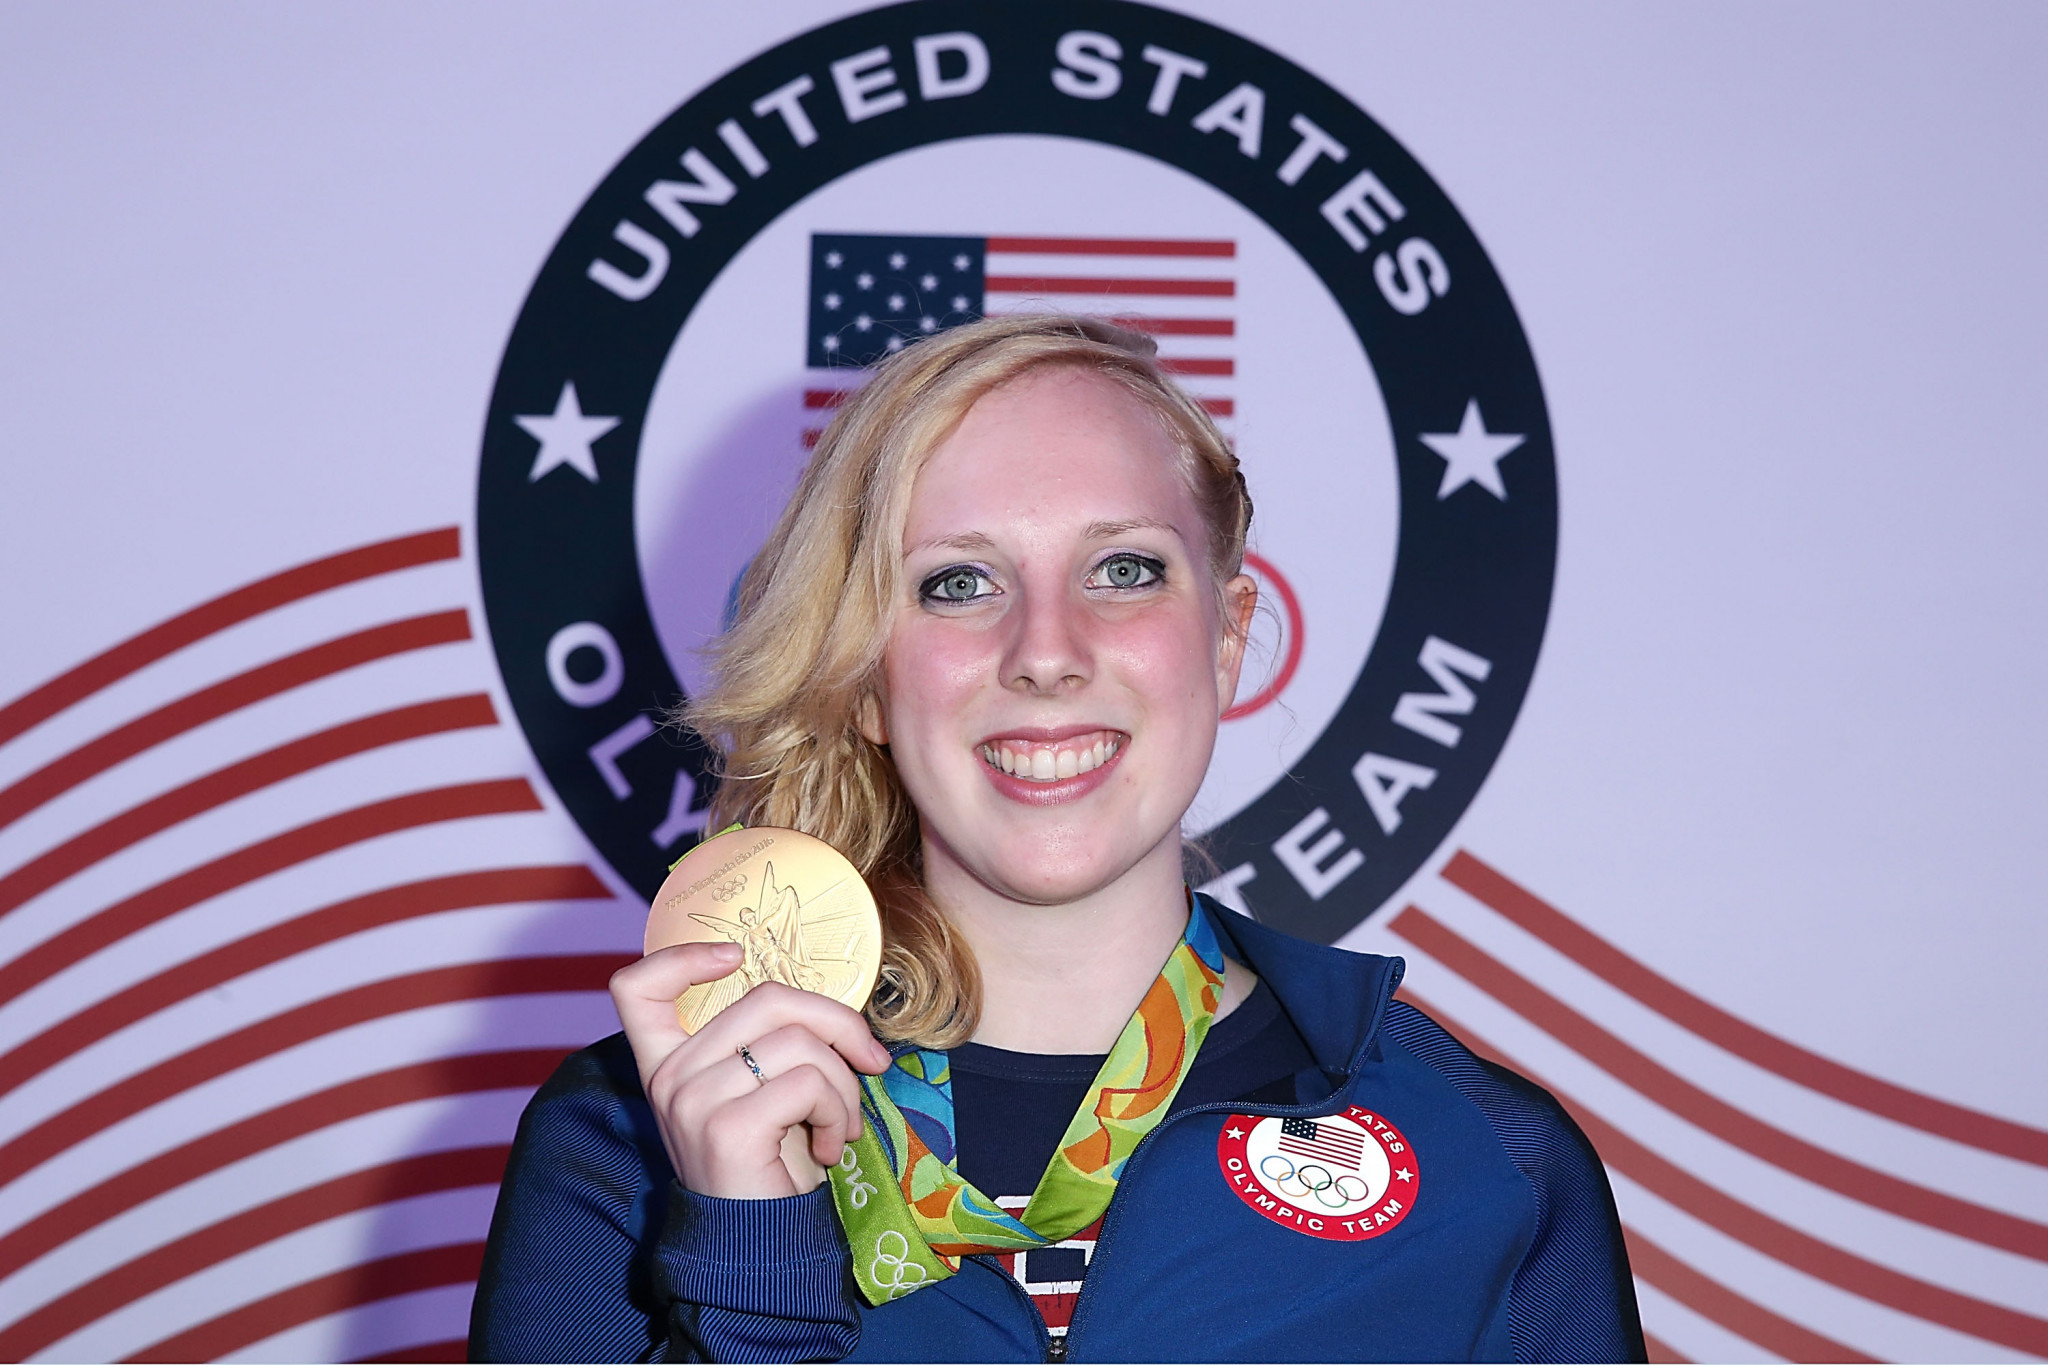 As part of his new role Alex Szablewski will work alongside athletes including Virginia Thrasher, who won gold in the women's 10 metre air rifle at the Rio 2016 Olympic Games ©Getty Images